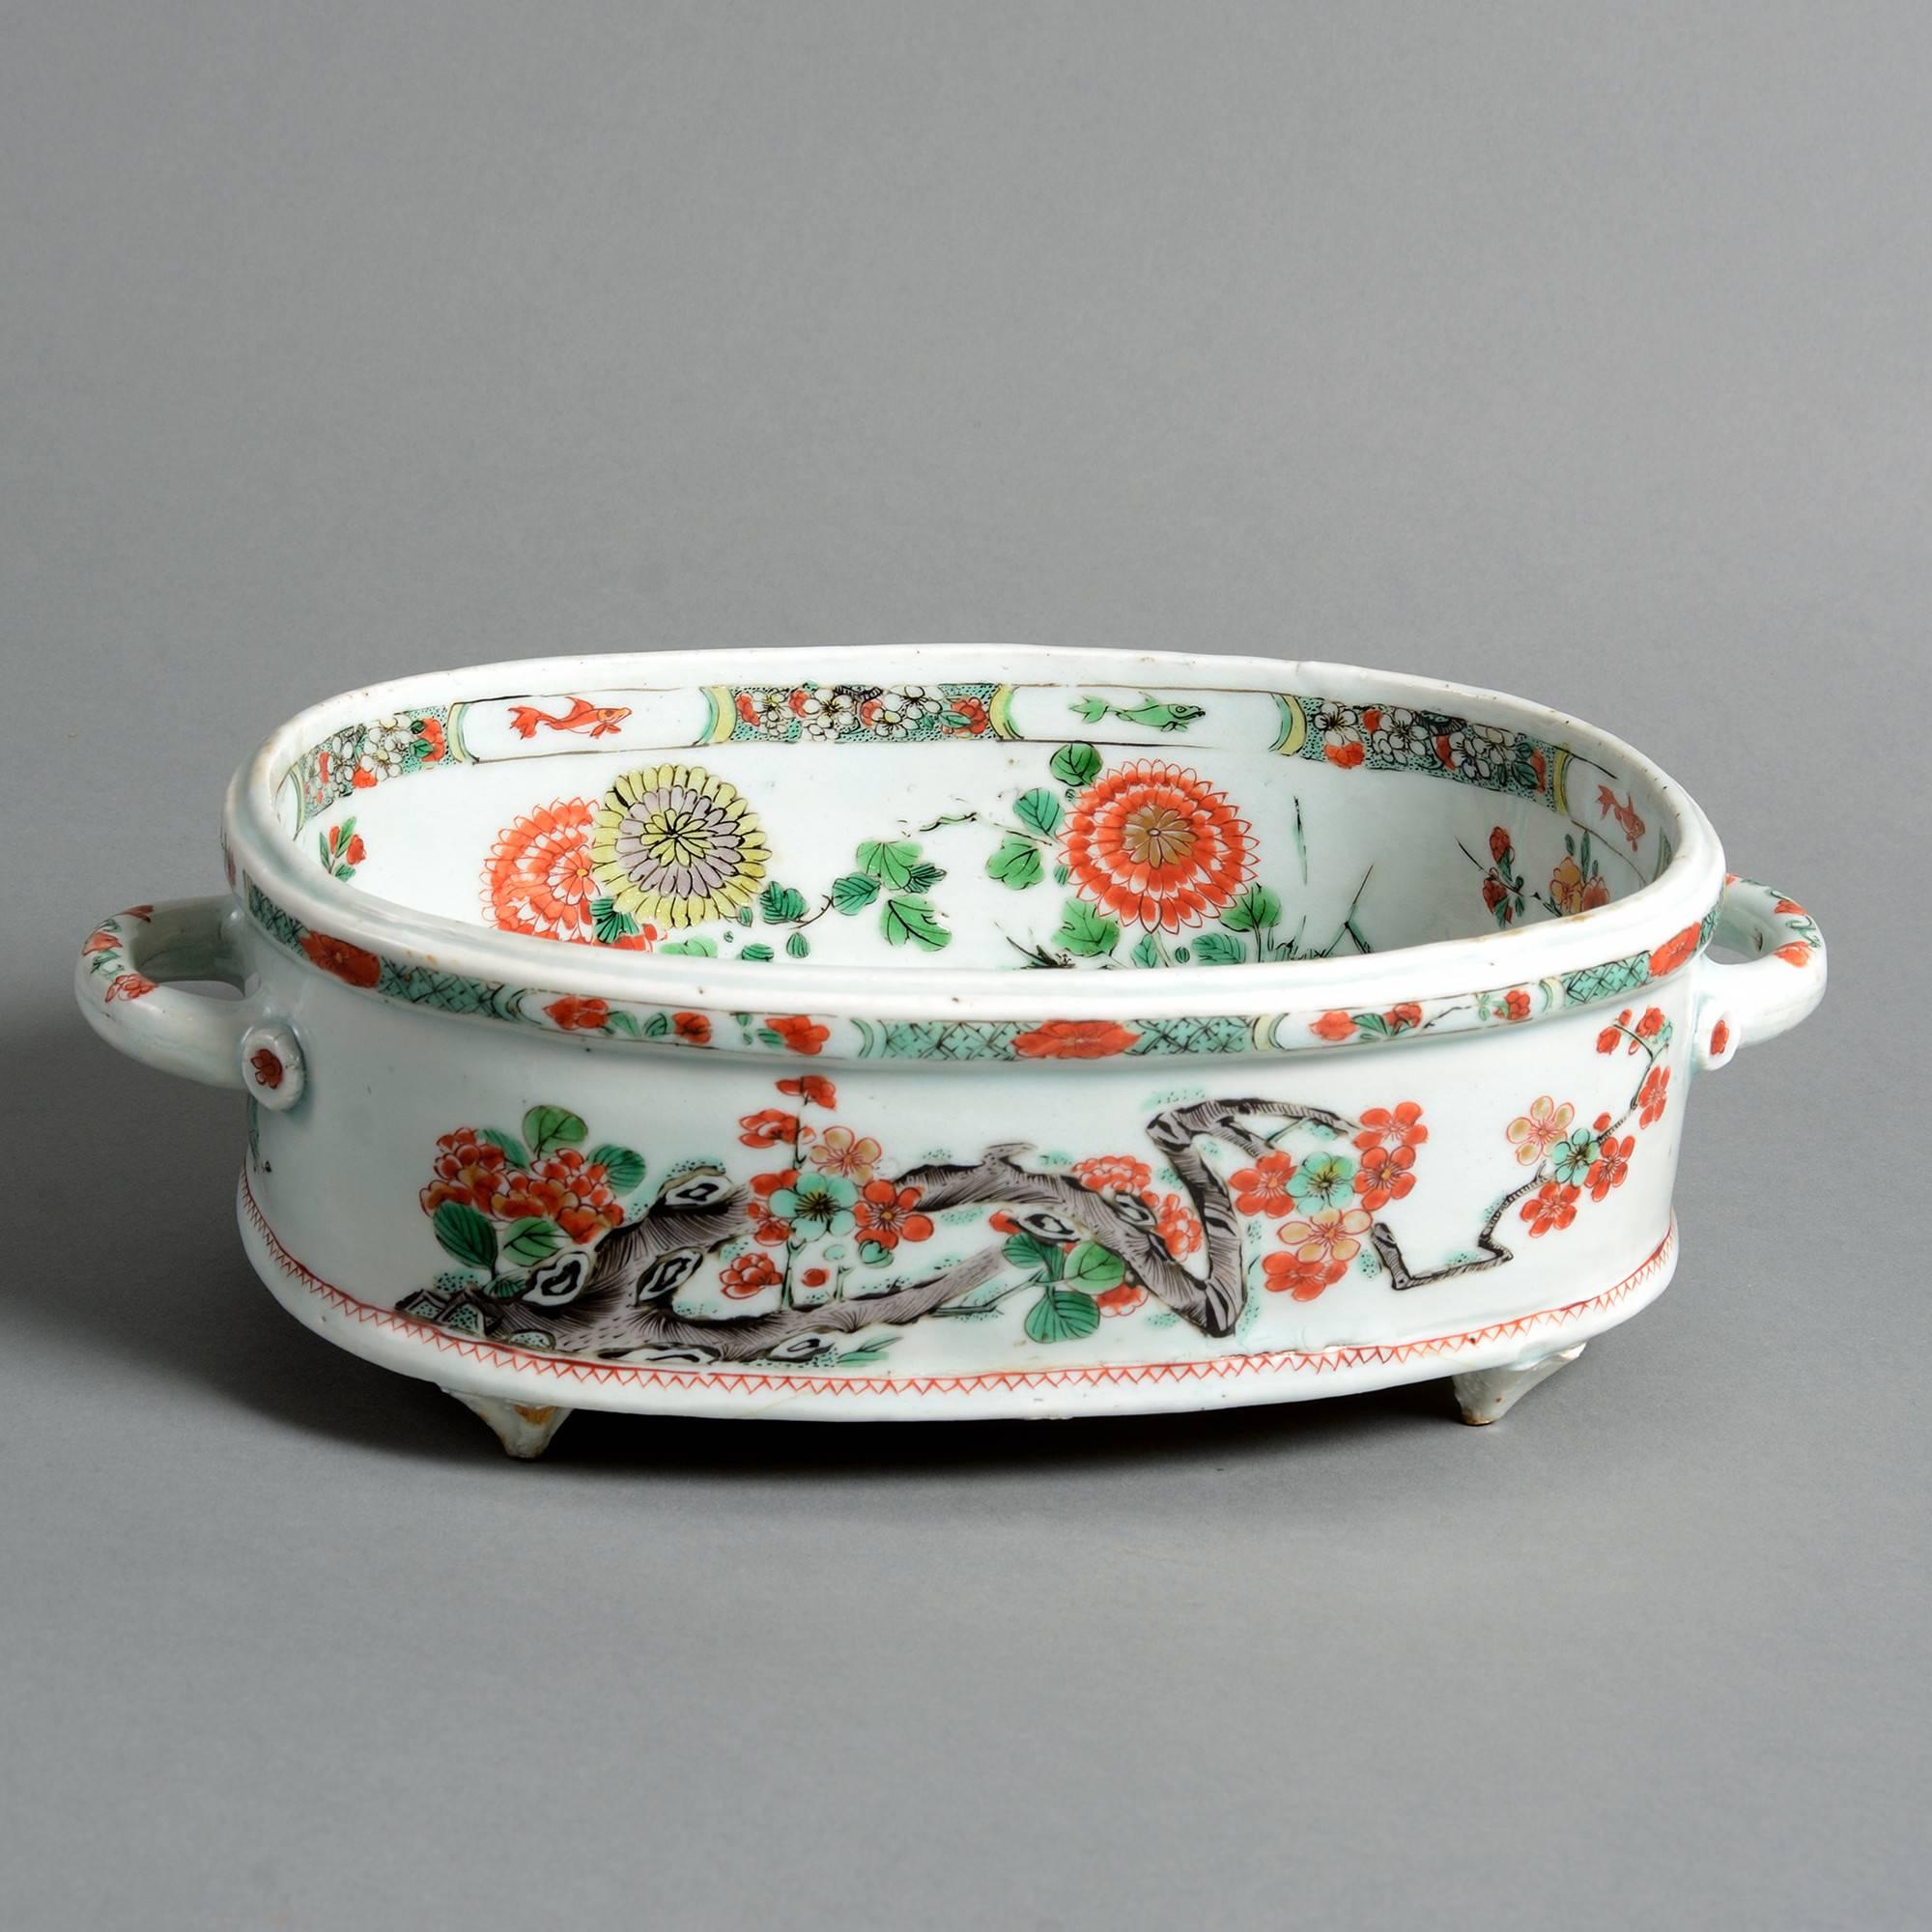 Two fine early 18th century famille verte porcelain jardinières of oval form, each decorated with stylized peonies on a white ground,

Qing dynasty,

Kangxi period (1661-1722).